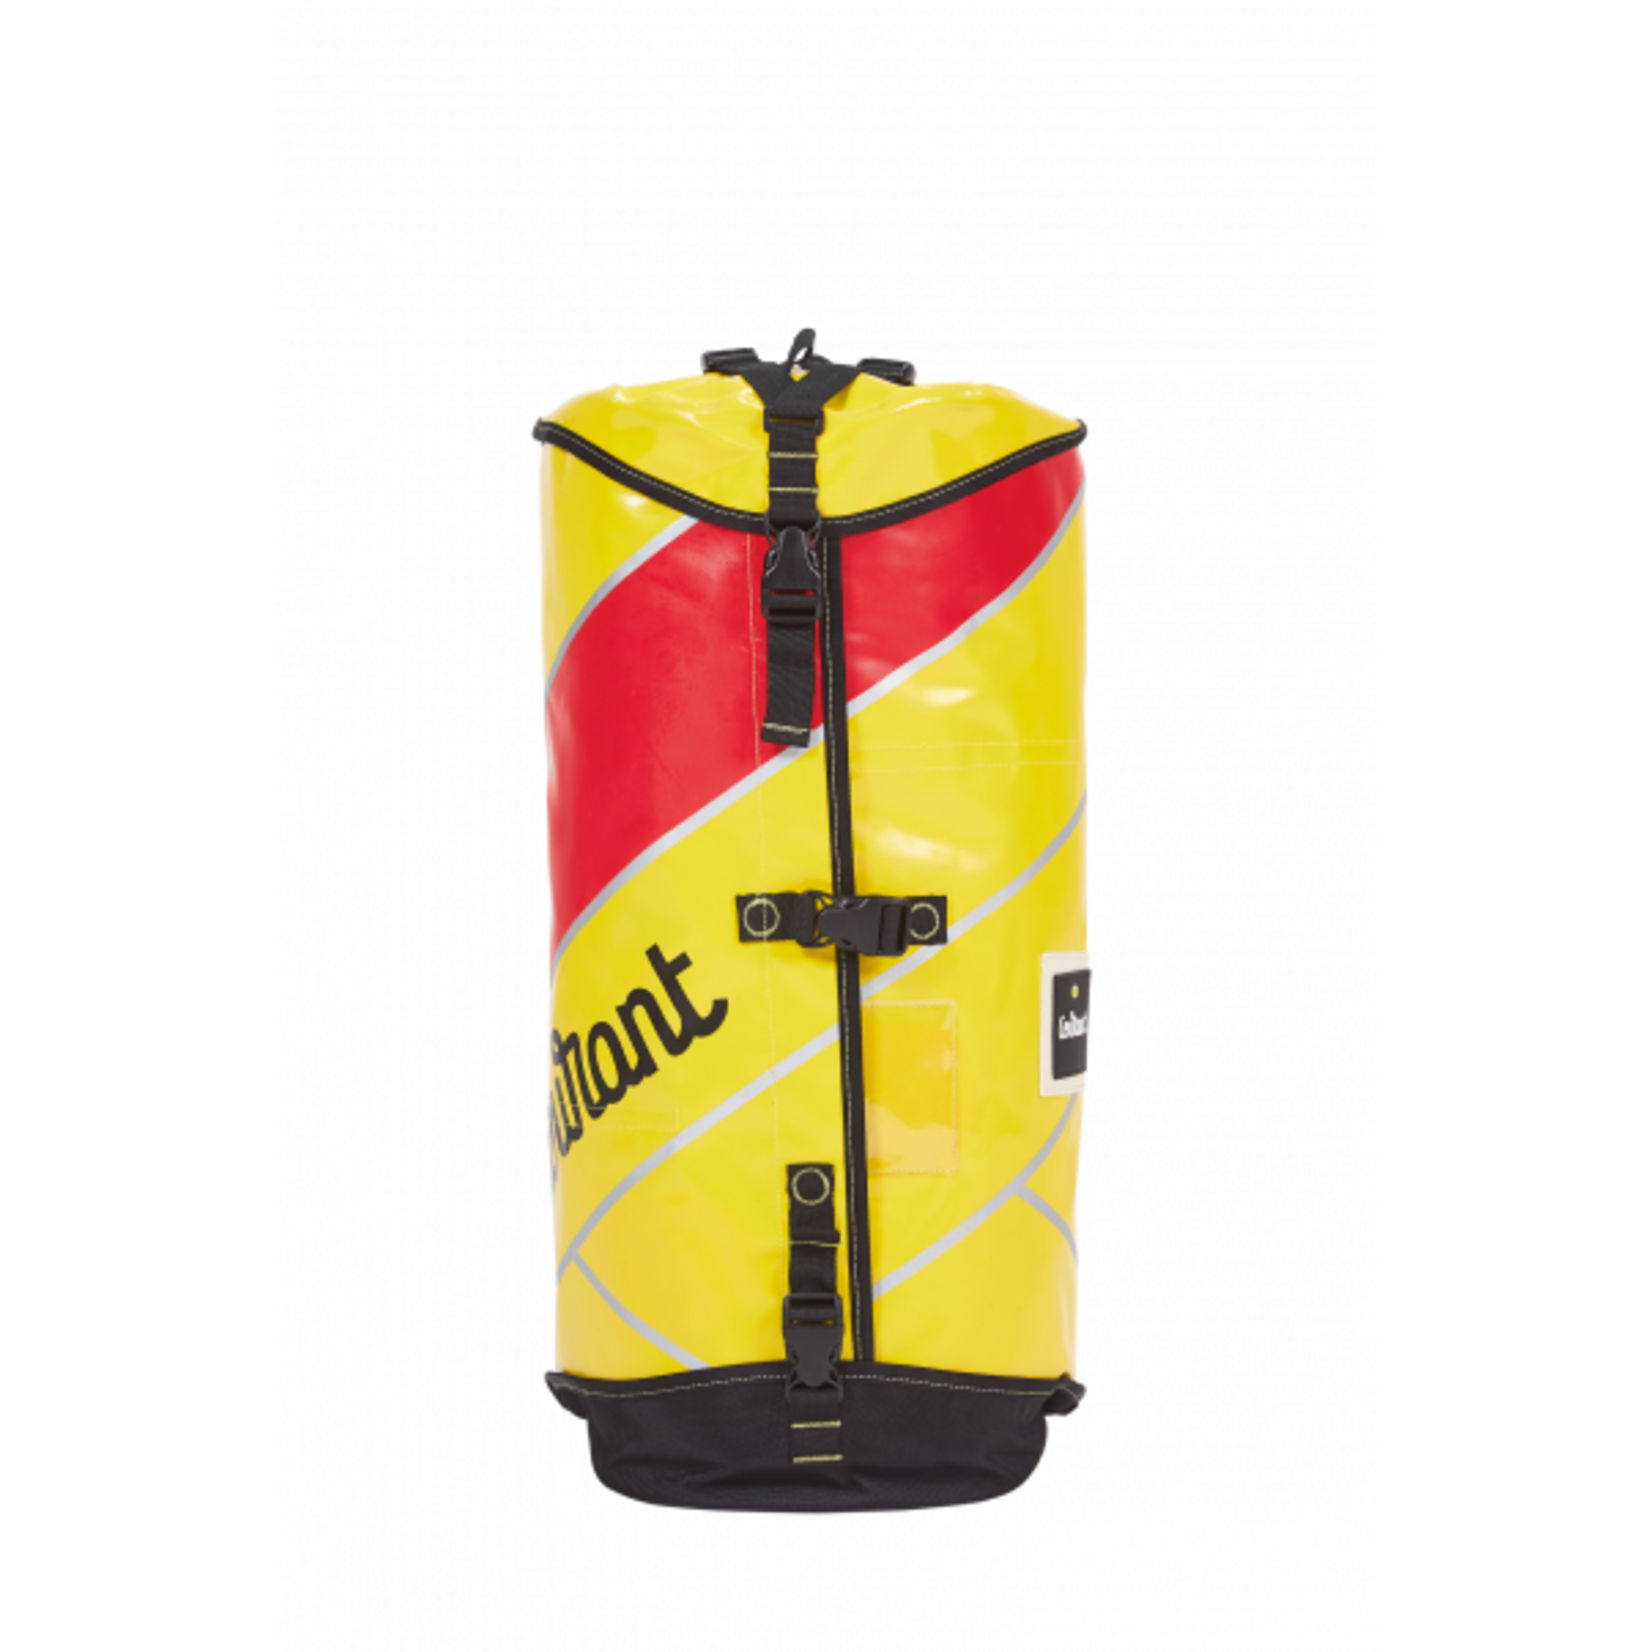 Courant Cross Evo yellow - 45 L  (Cross Rope Light included)